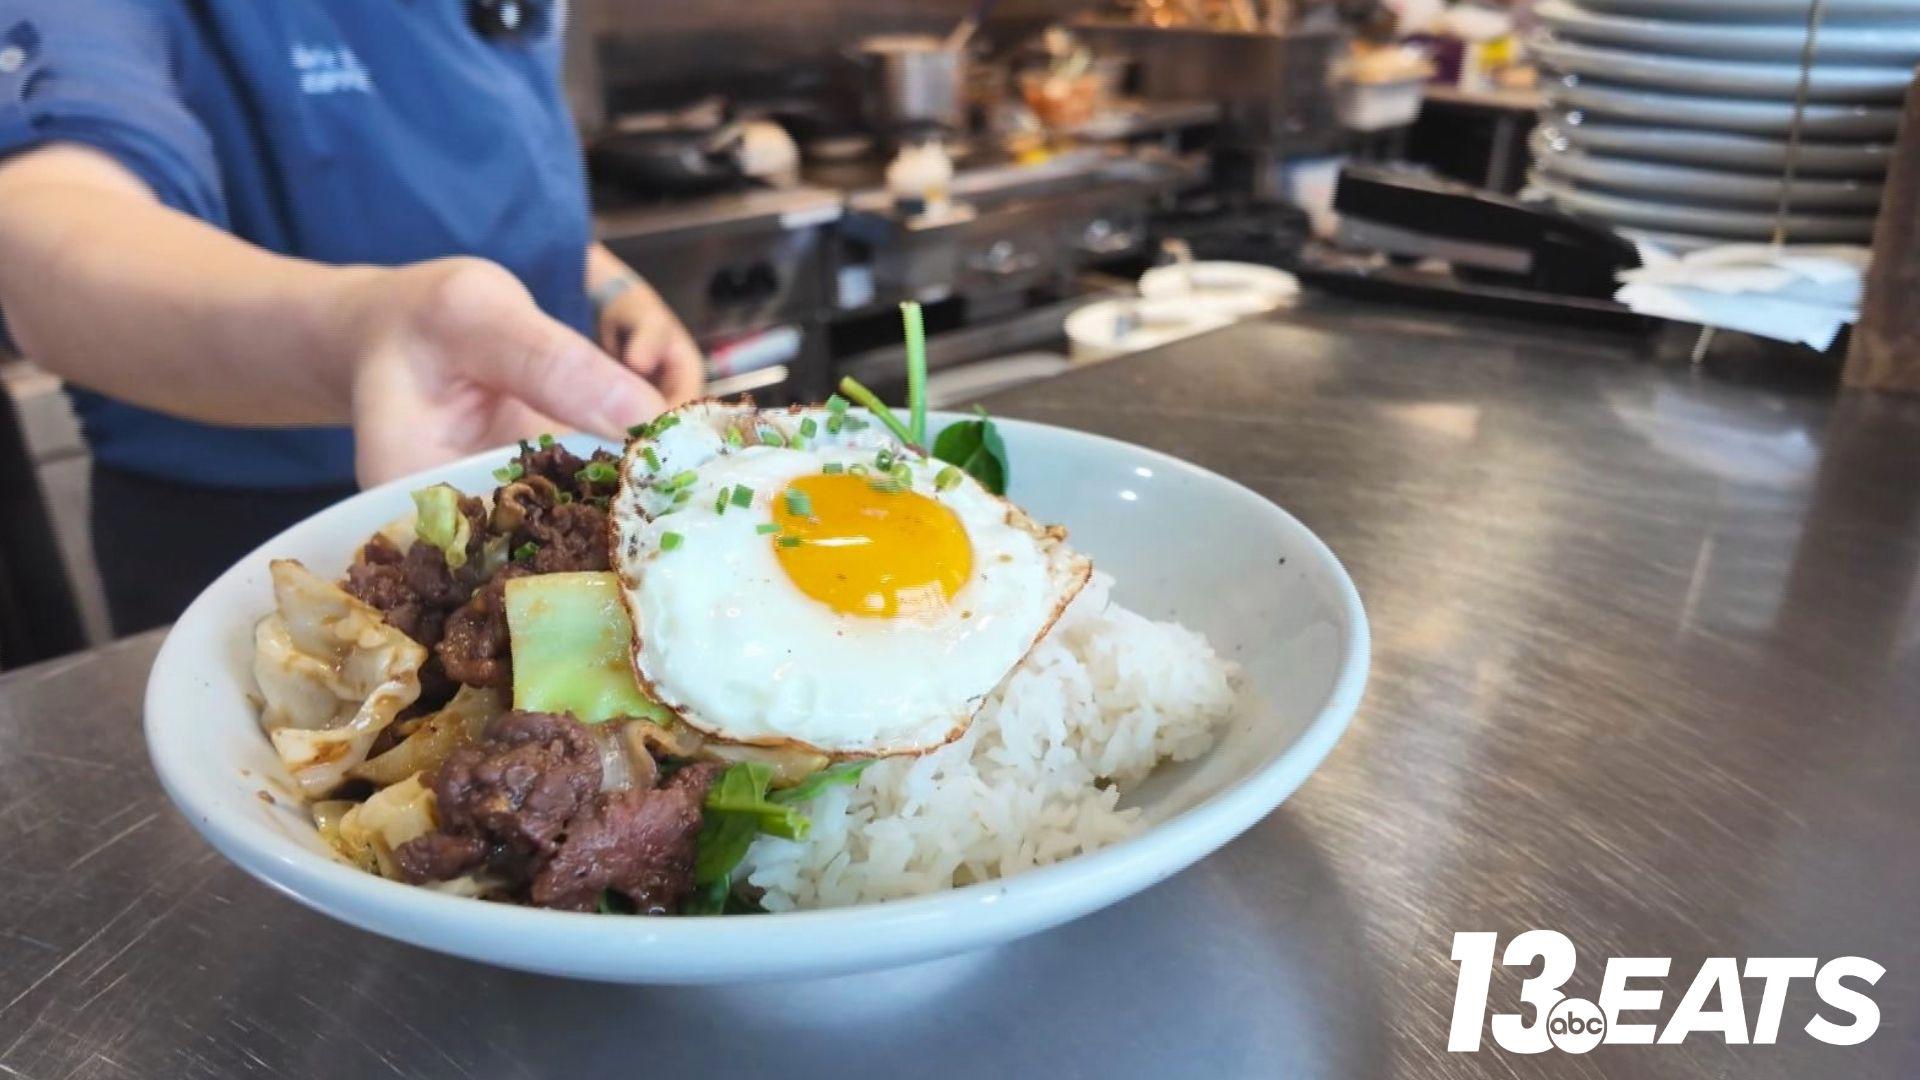 Sun Lee's dream was to play in the orchestra. Until she found a new tune — serving what could be the best Korean food in West Michigan.